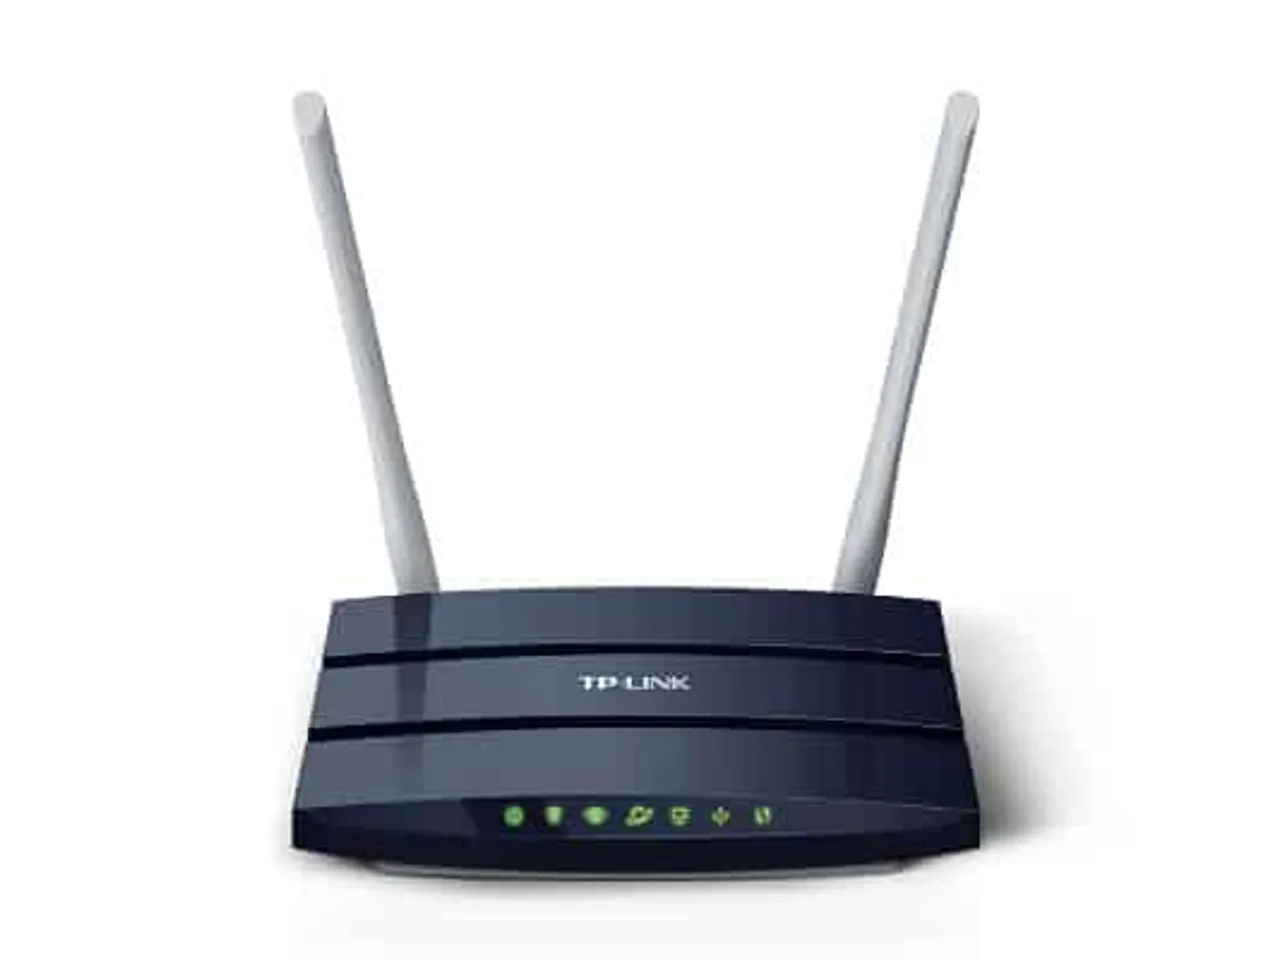 TP-LINK Launches Archer C50 Wireless Router to Cater New-age Connectivity Demand